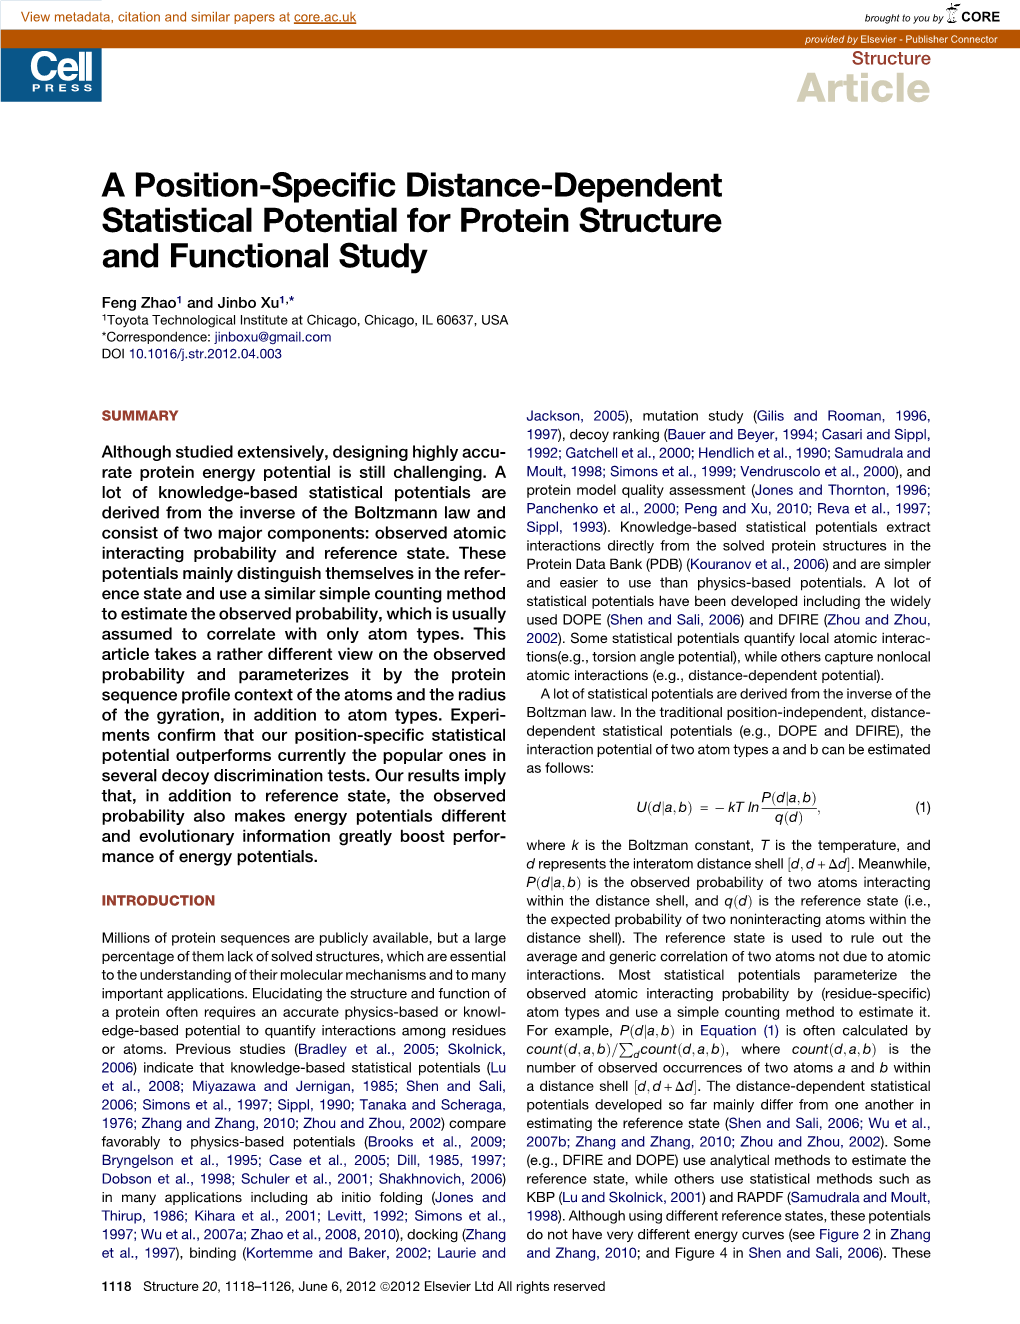 A Position-Specific Statistical Potential for Protein Structure and Functional